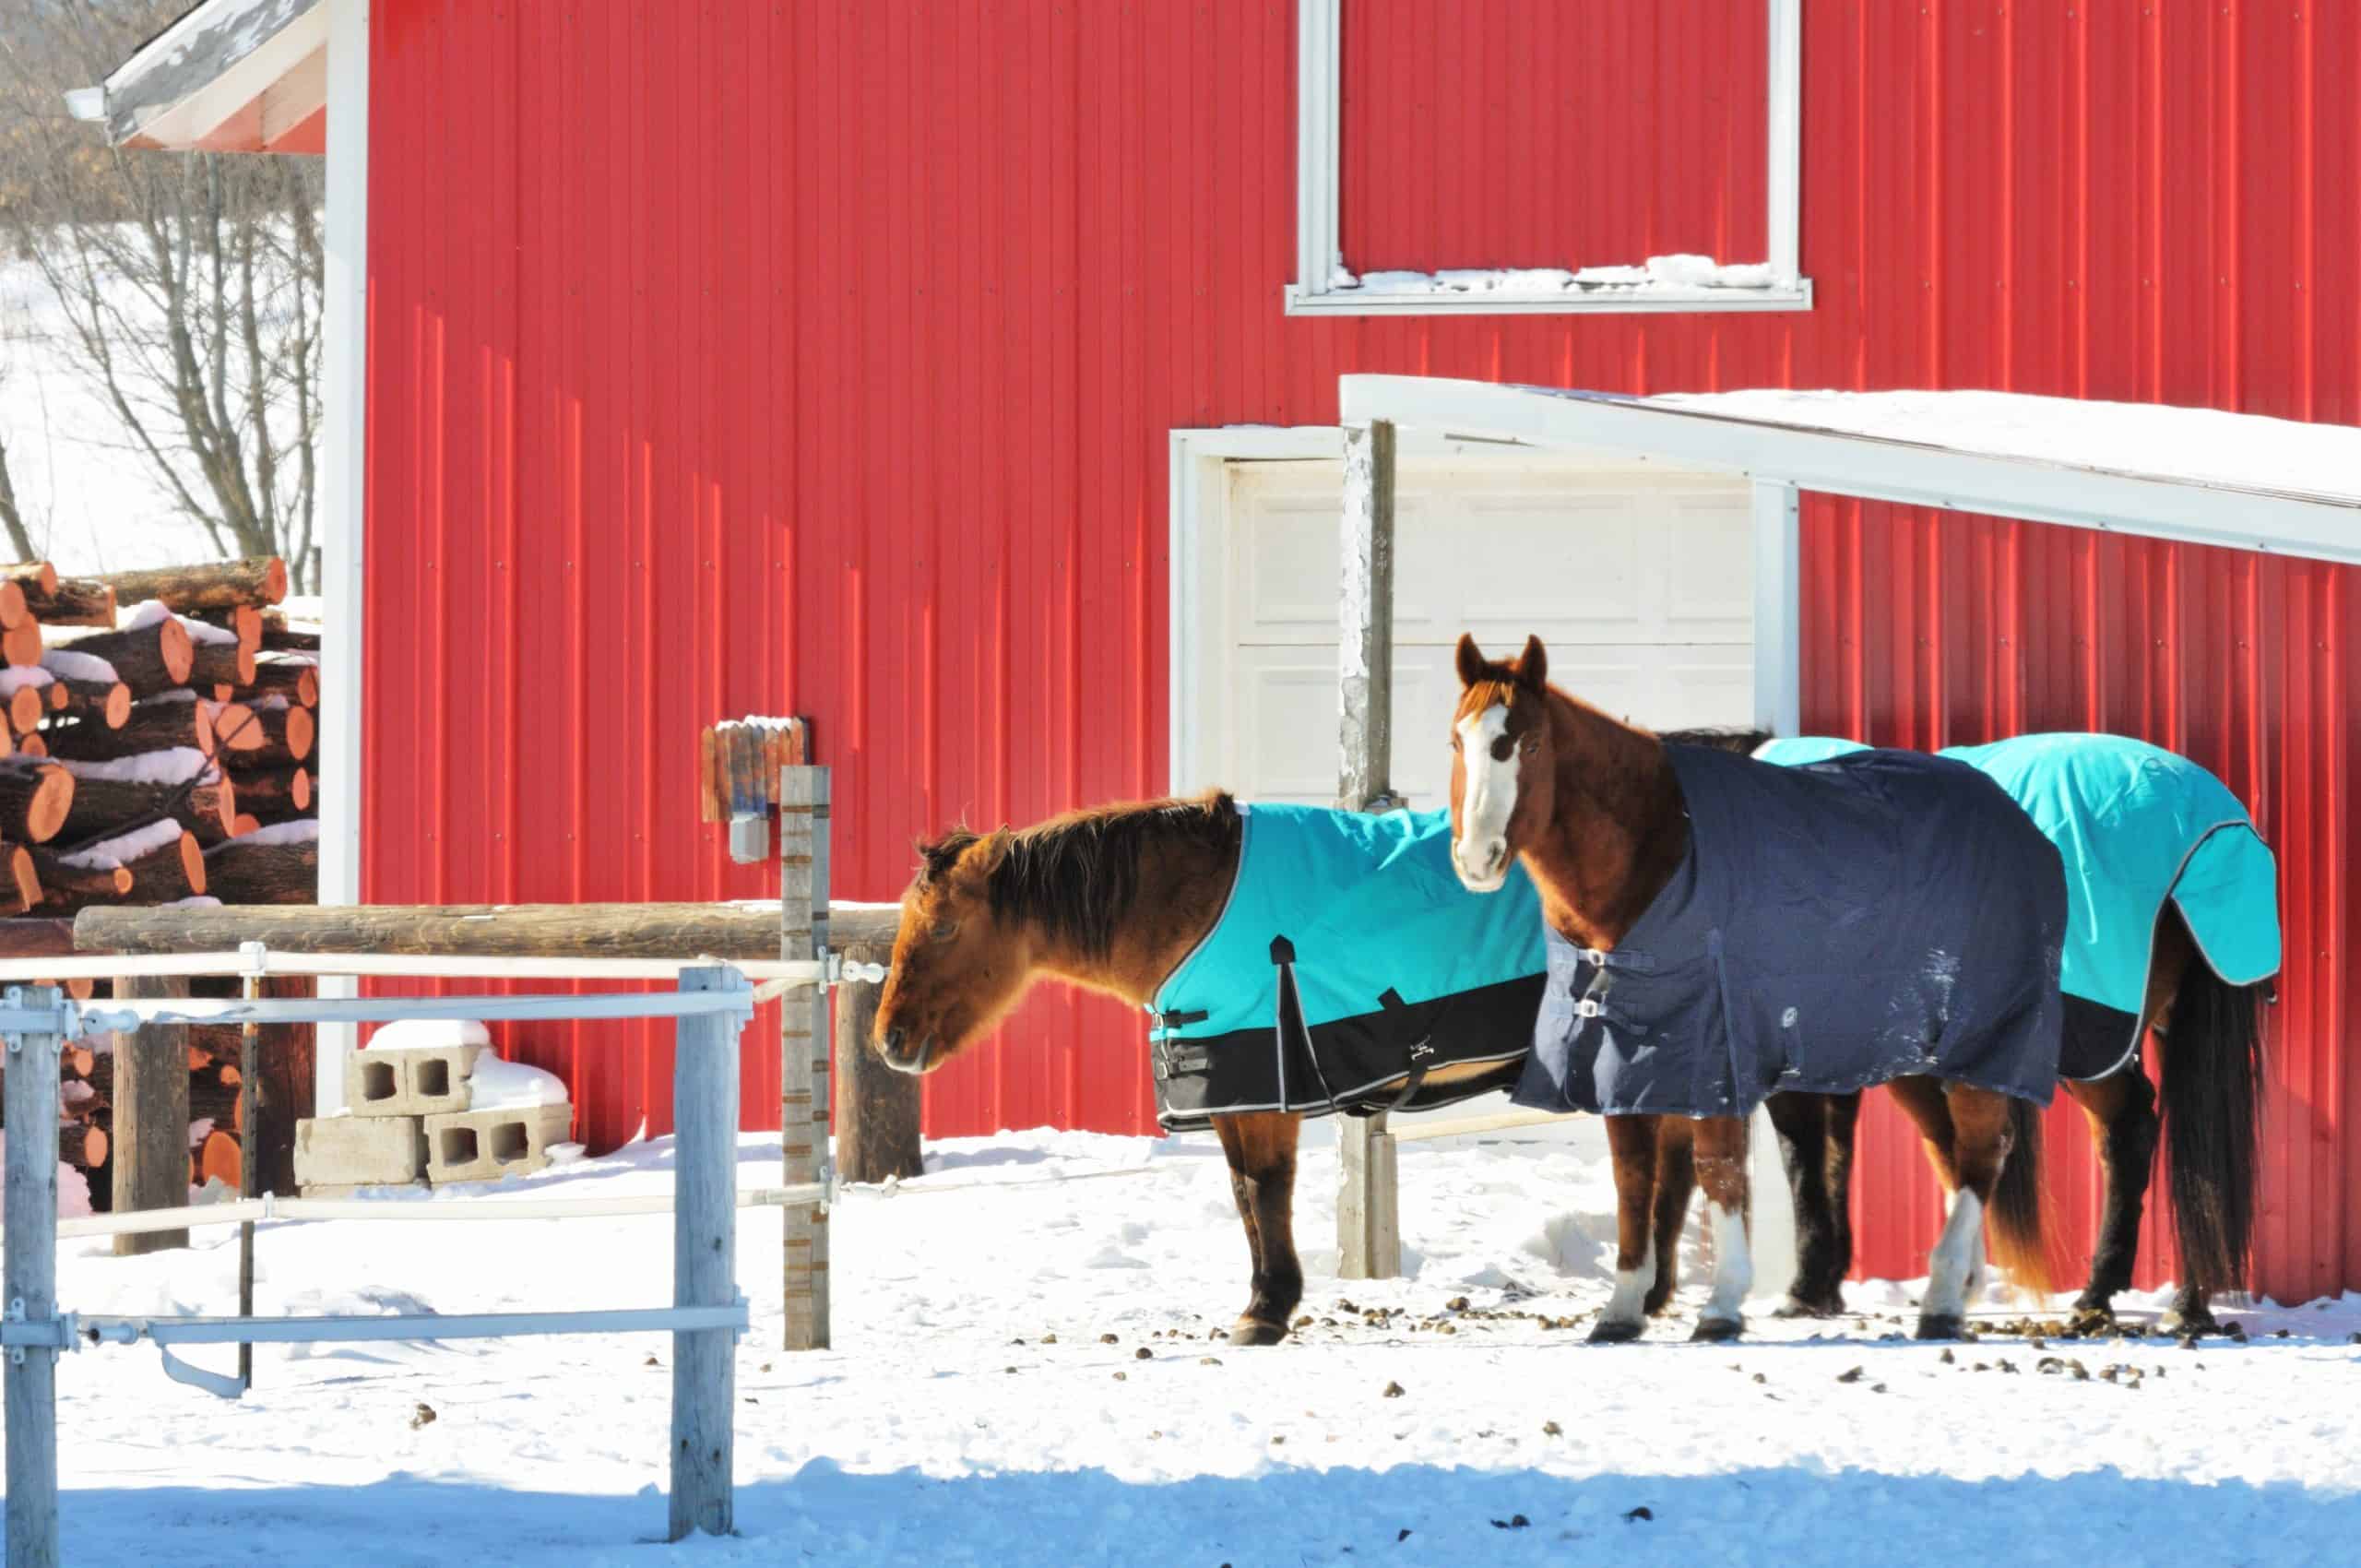 Three horses wearing blue blankets in winter corral.